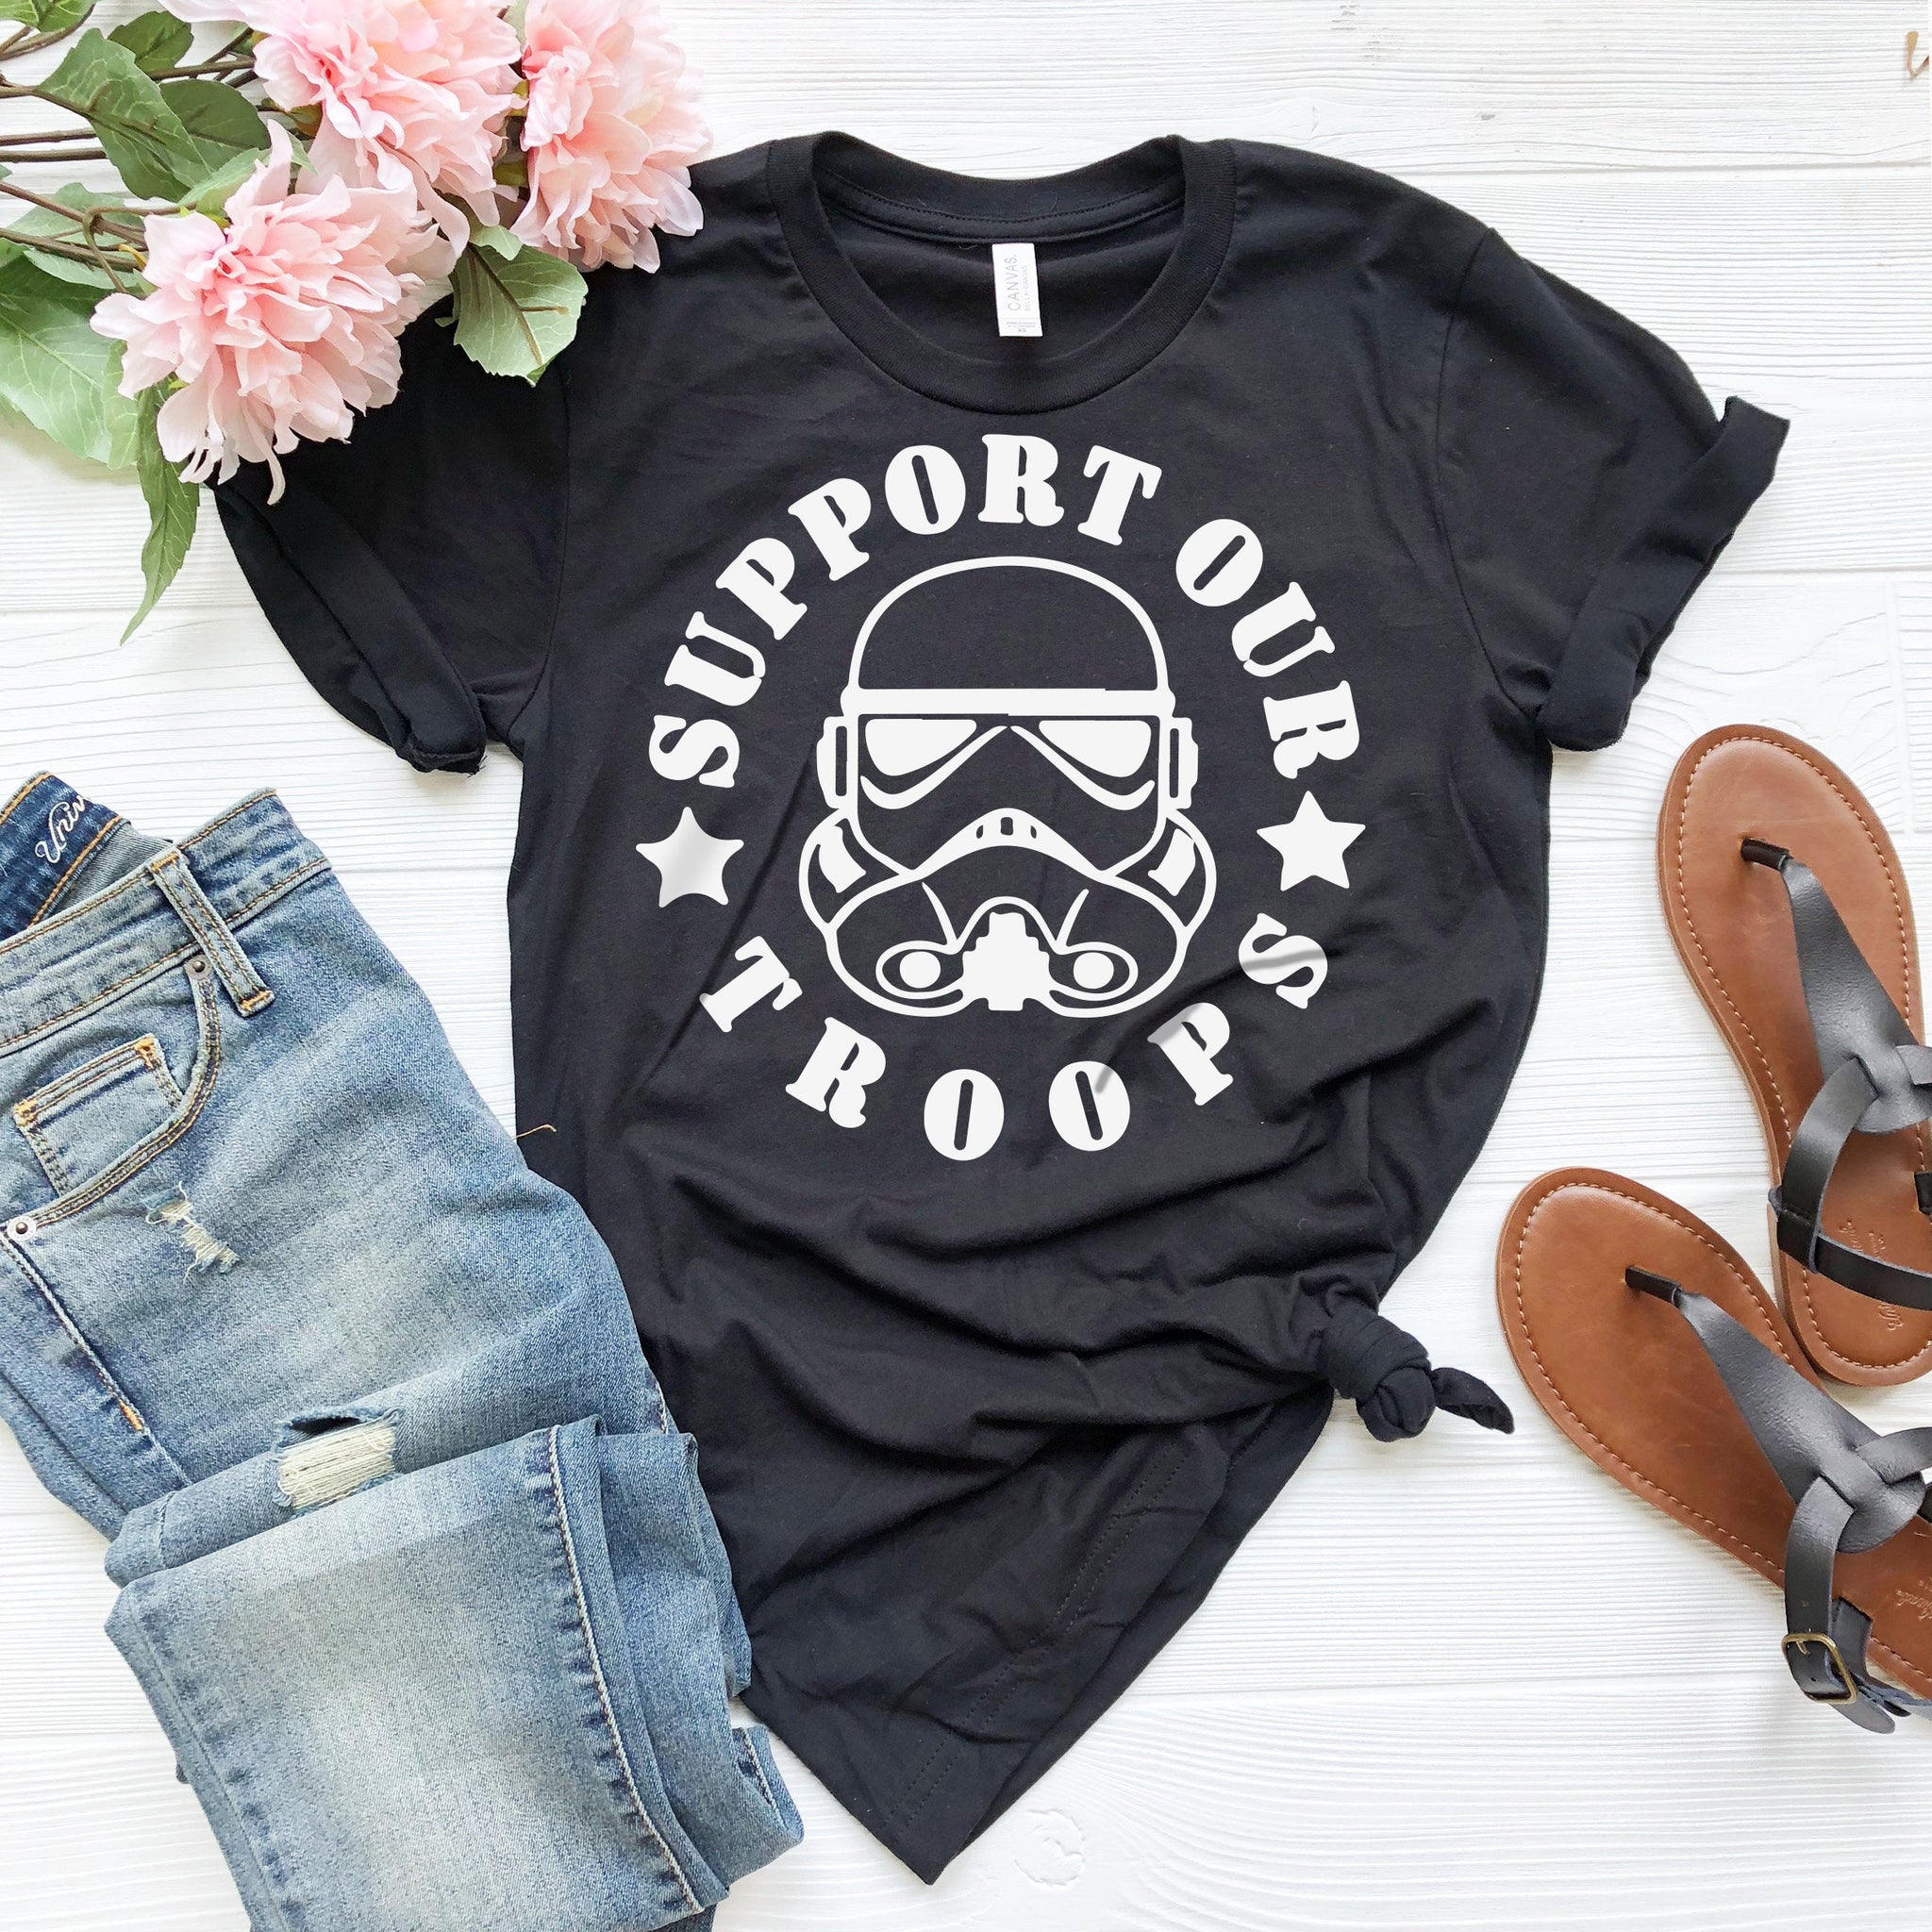 Support Our Troops, Starwars, Funny Shirts, Funny Tshirt, Cute Tshirts, Sarcastic Gifts - Fastdeliverytees.com